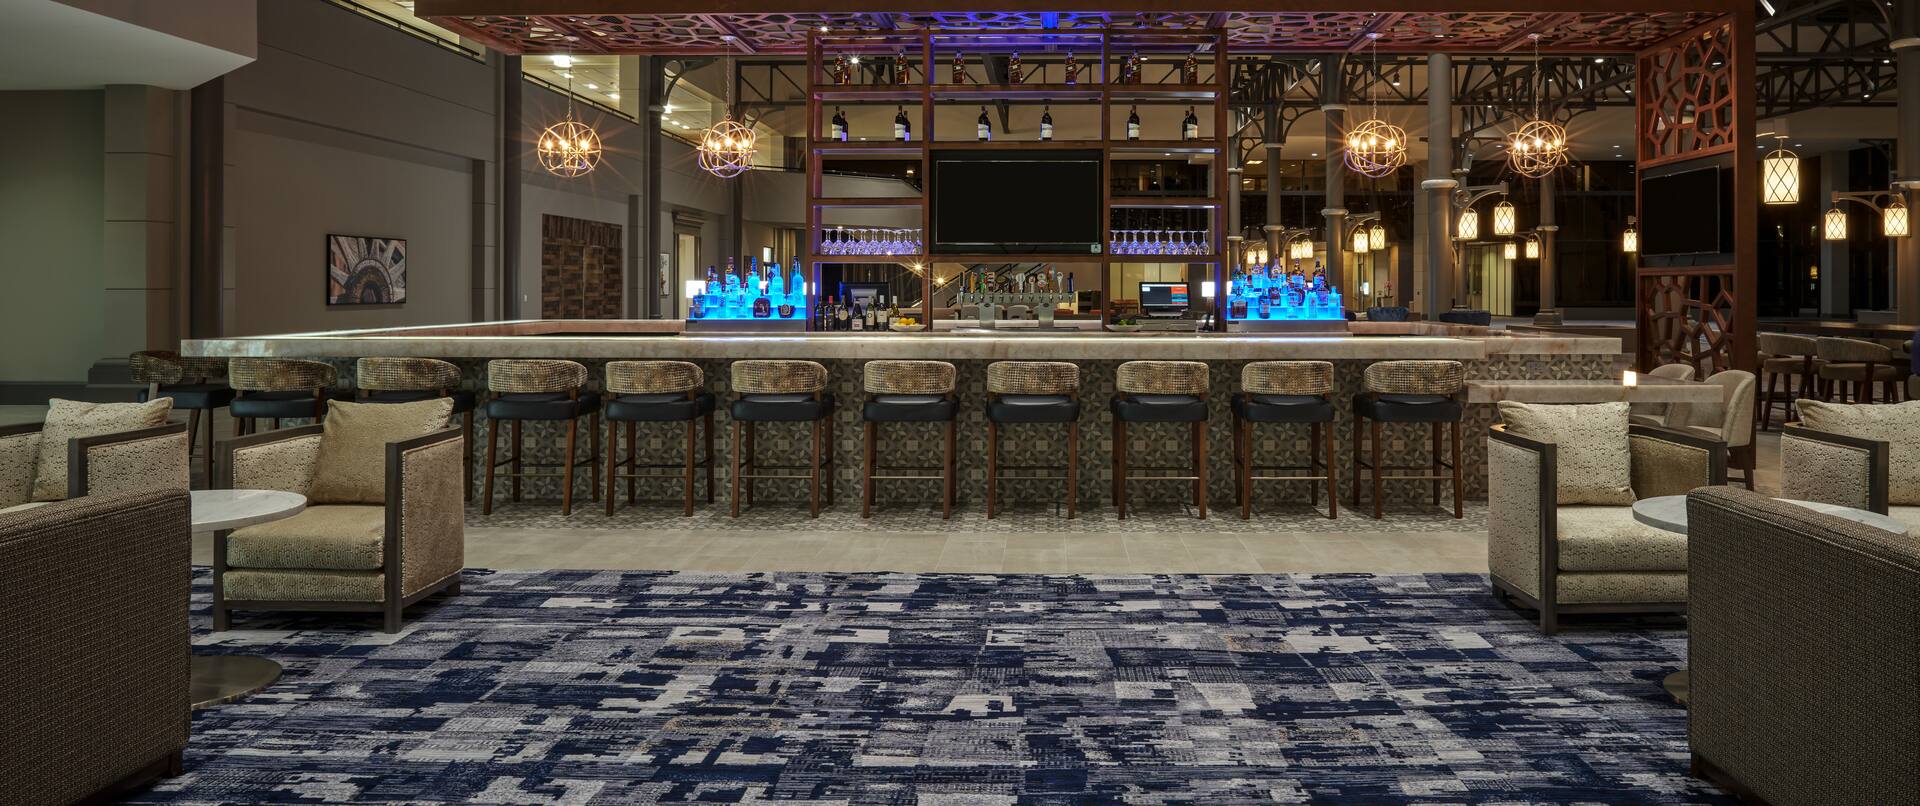 Bar area with barstools